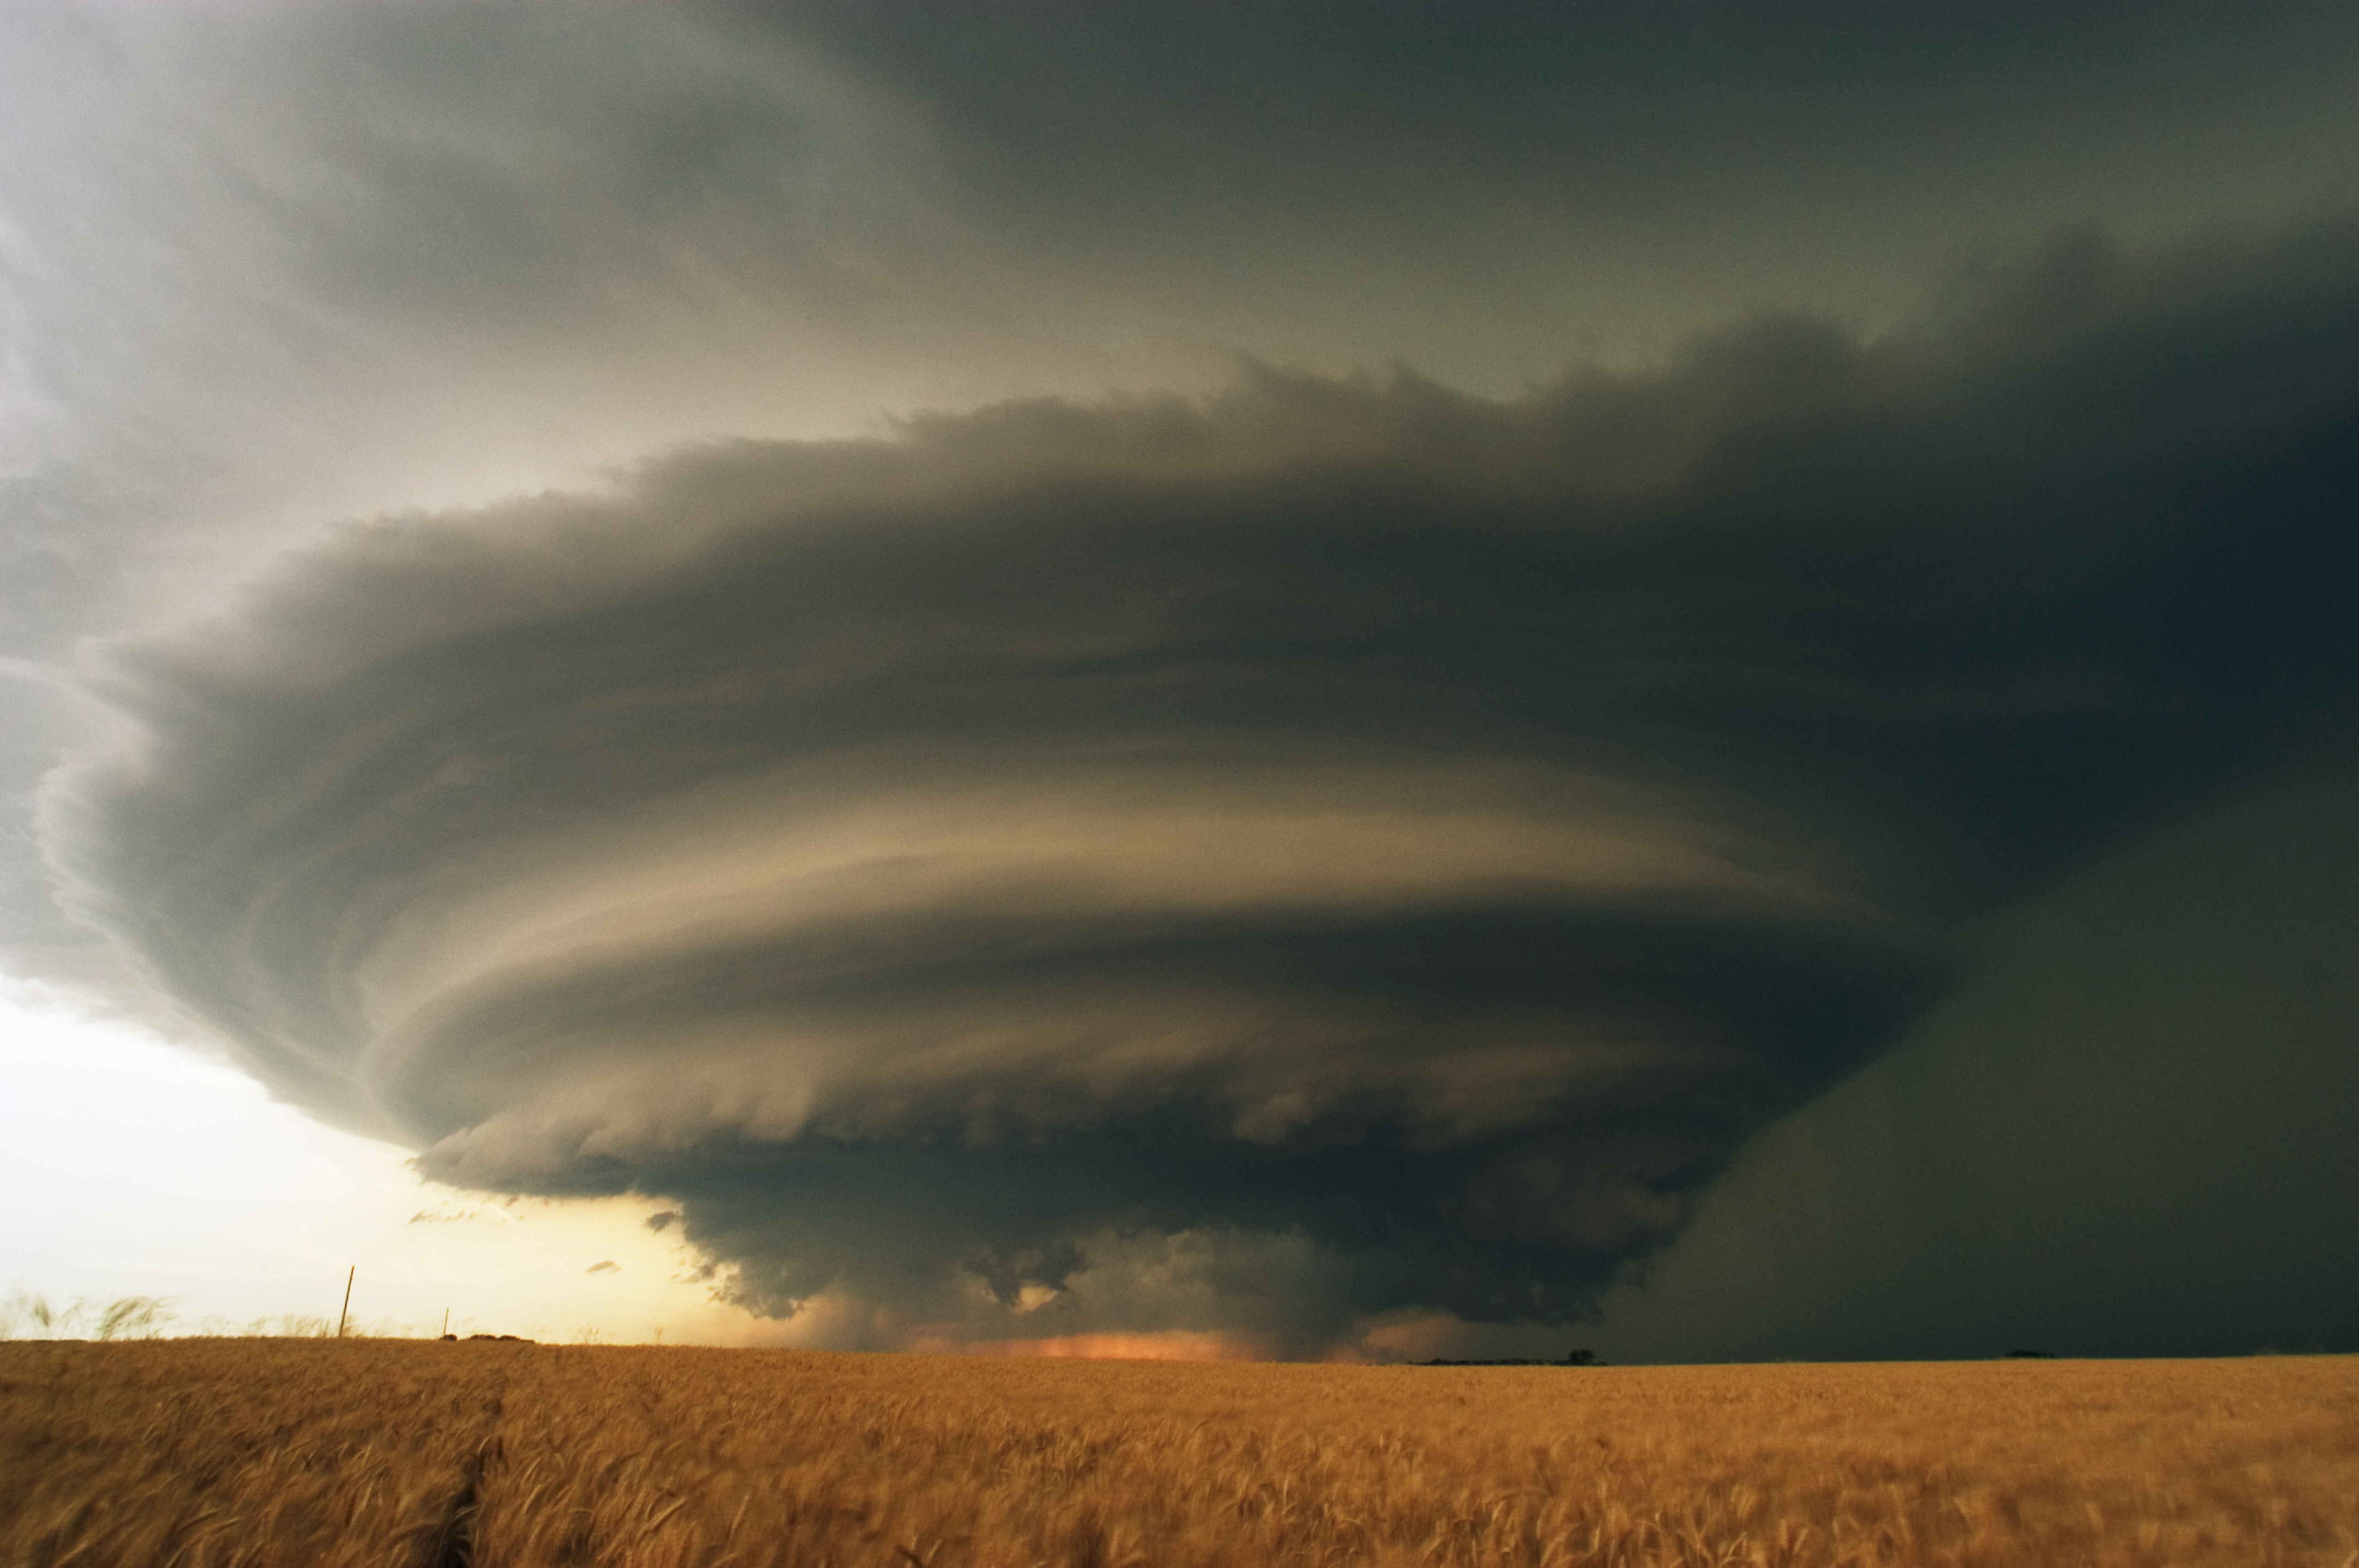 05 Jun 2004, Medicine Lodge, Kansas, USA --- An isolated supercell thunderstorm threatens south-central Kansas on June 5, 2004.  The flying saucer-shaped severe storm produced baseball-sized hail. --- Image by © Jim Reed/Corbis